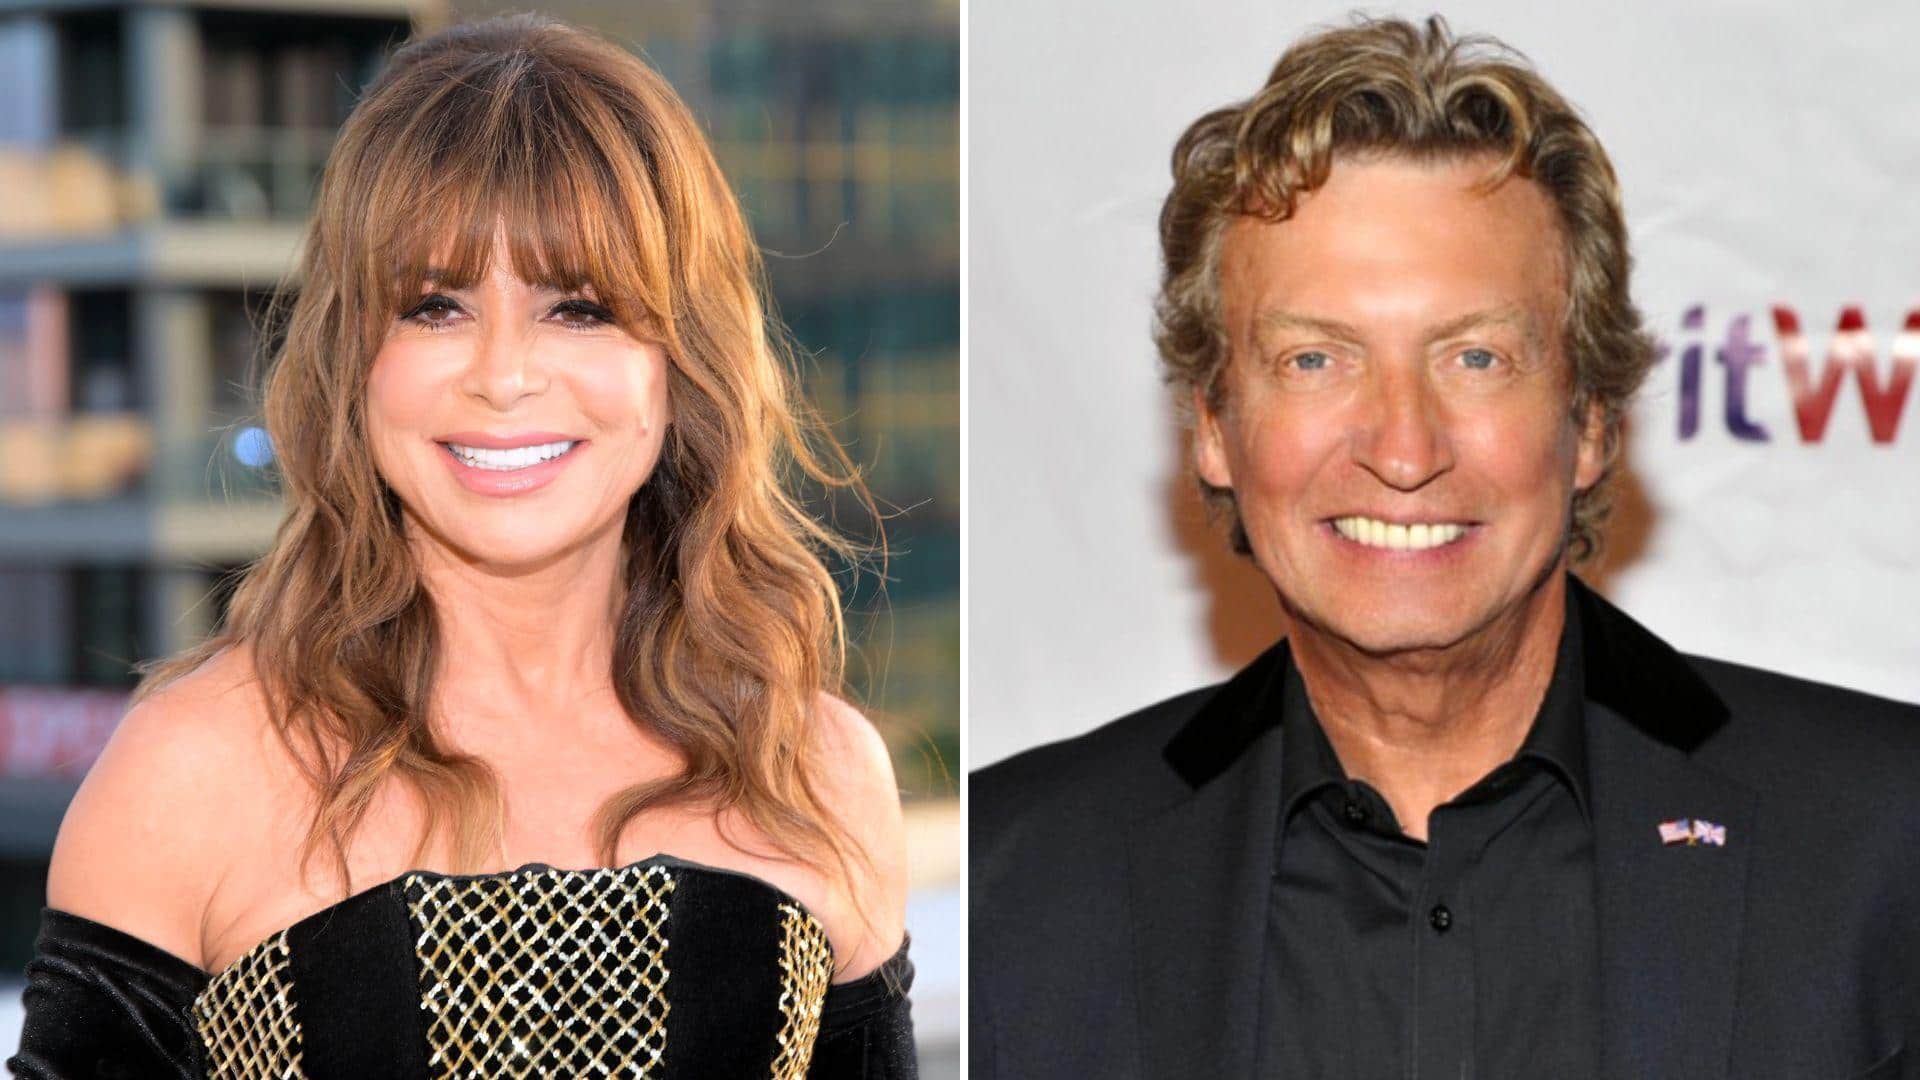 Paula Abdul sues 'American Idol' producer over sexual assault allegations